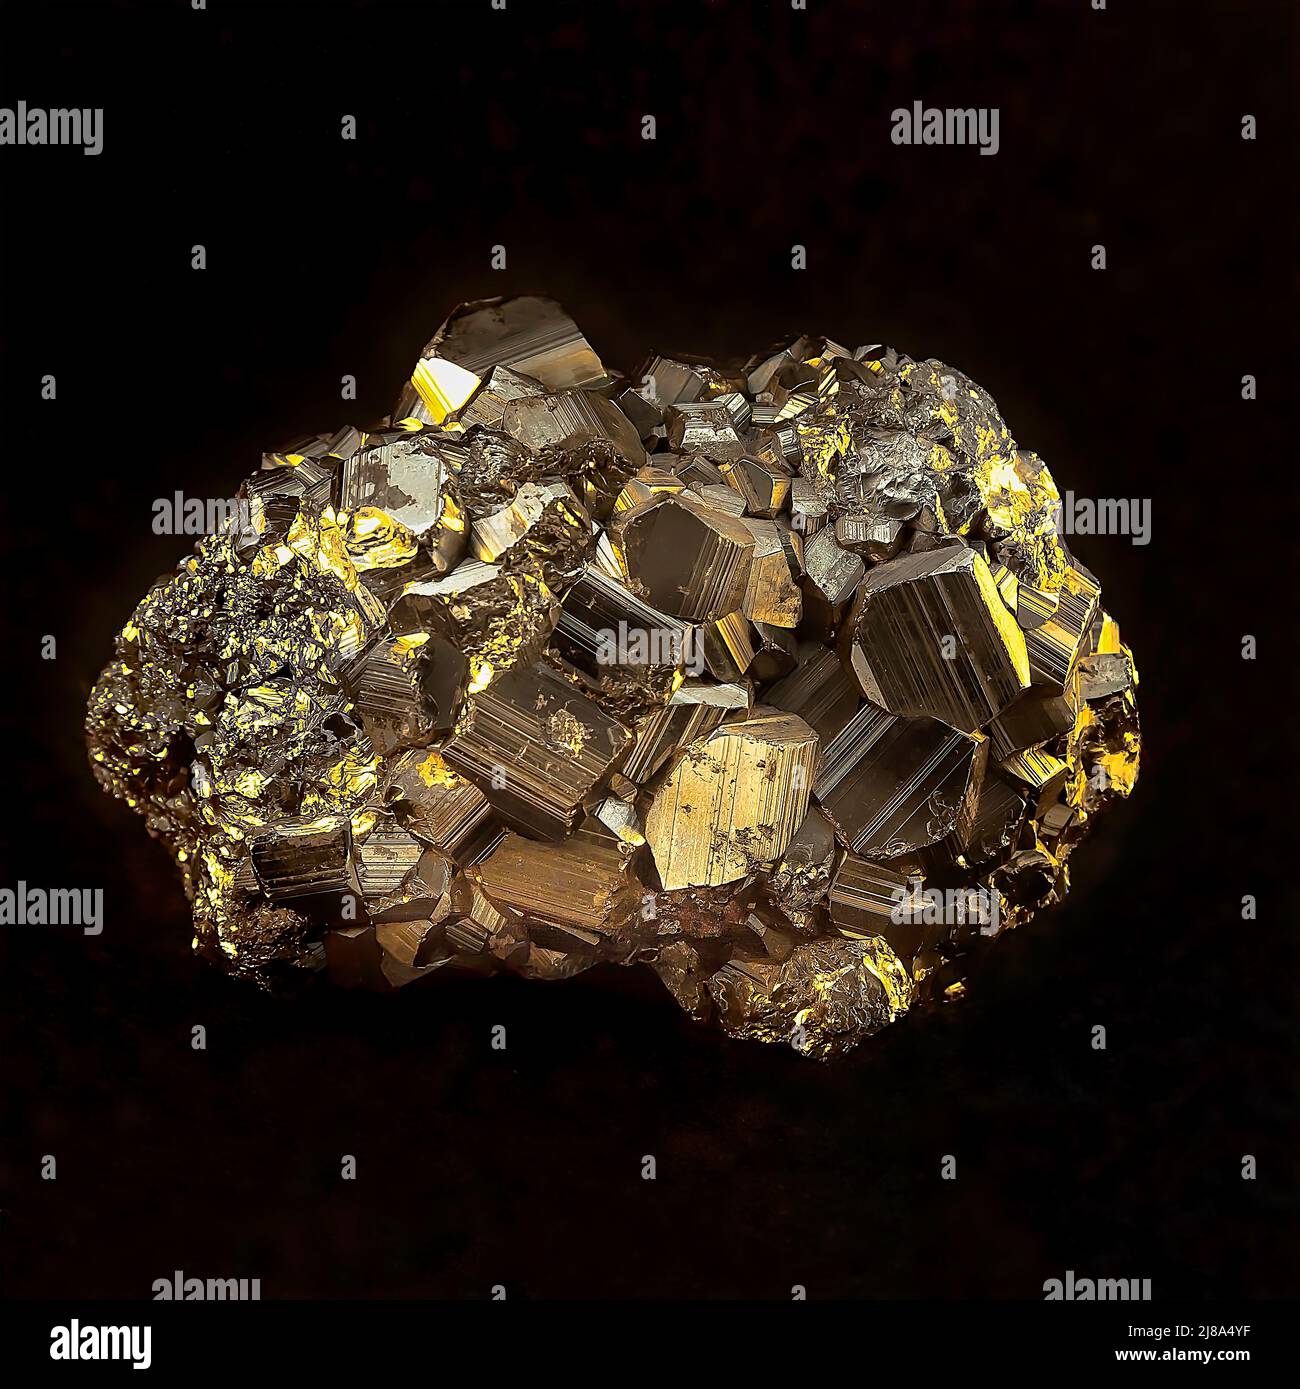 Pyrite Stone. Isolated. Golden natural raw stone in close up. Black background. Stock Image.b Stock Photo